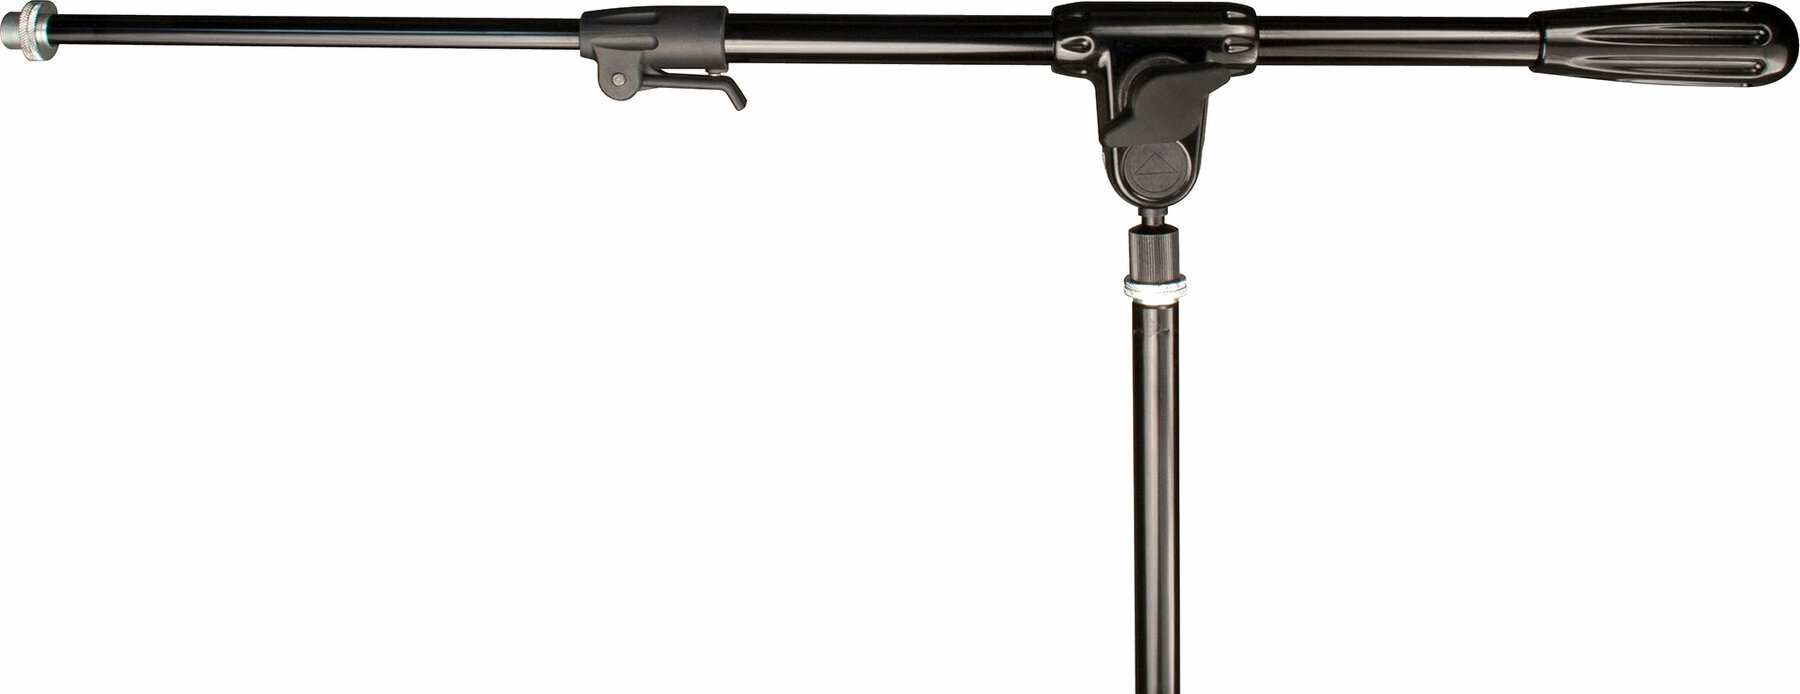 Accessory for microphone stand Ultimate Ulti-Boom Pro TB Accessory for microphone stand